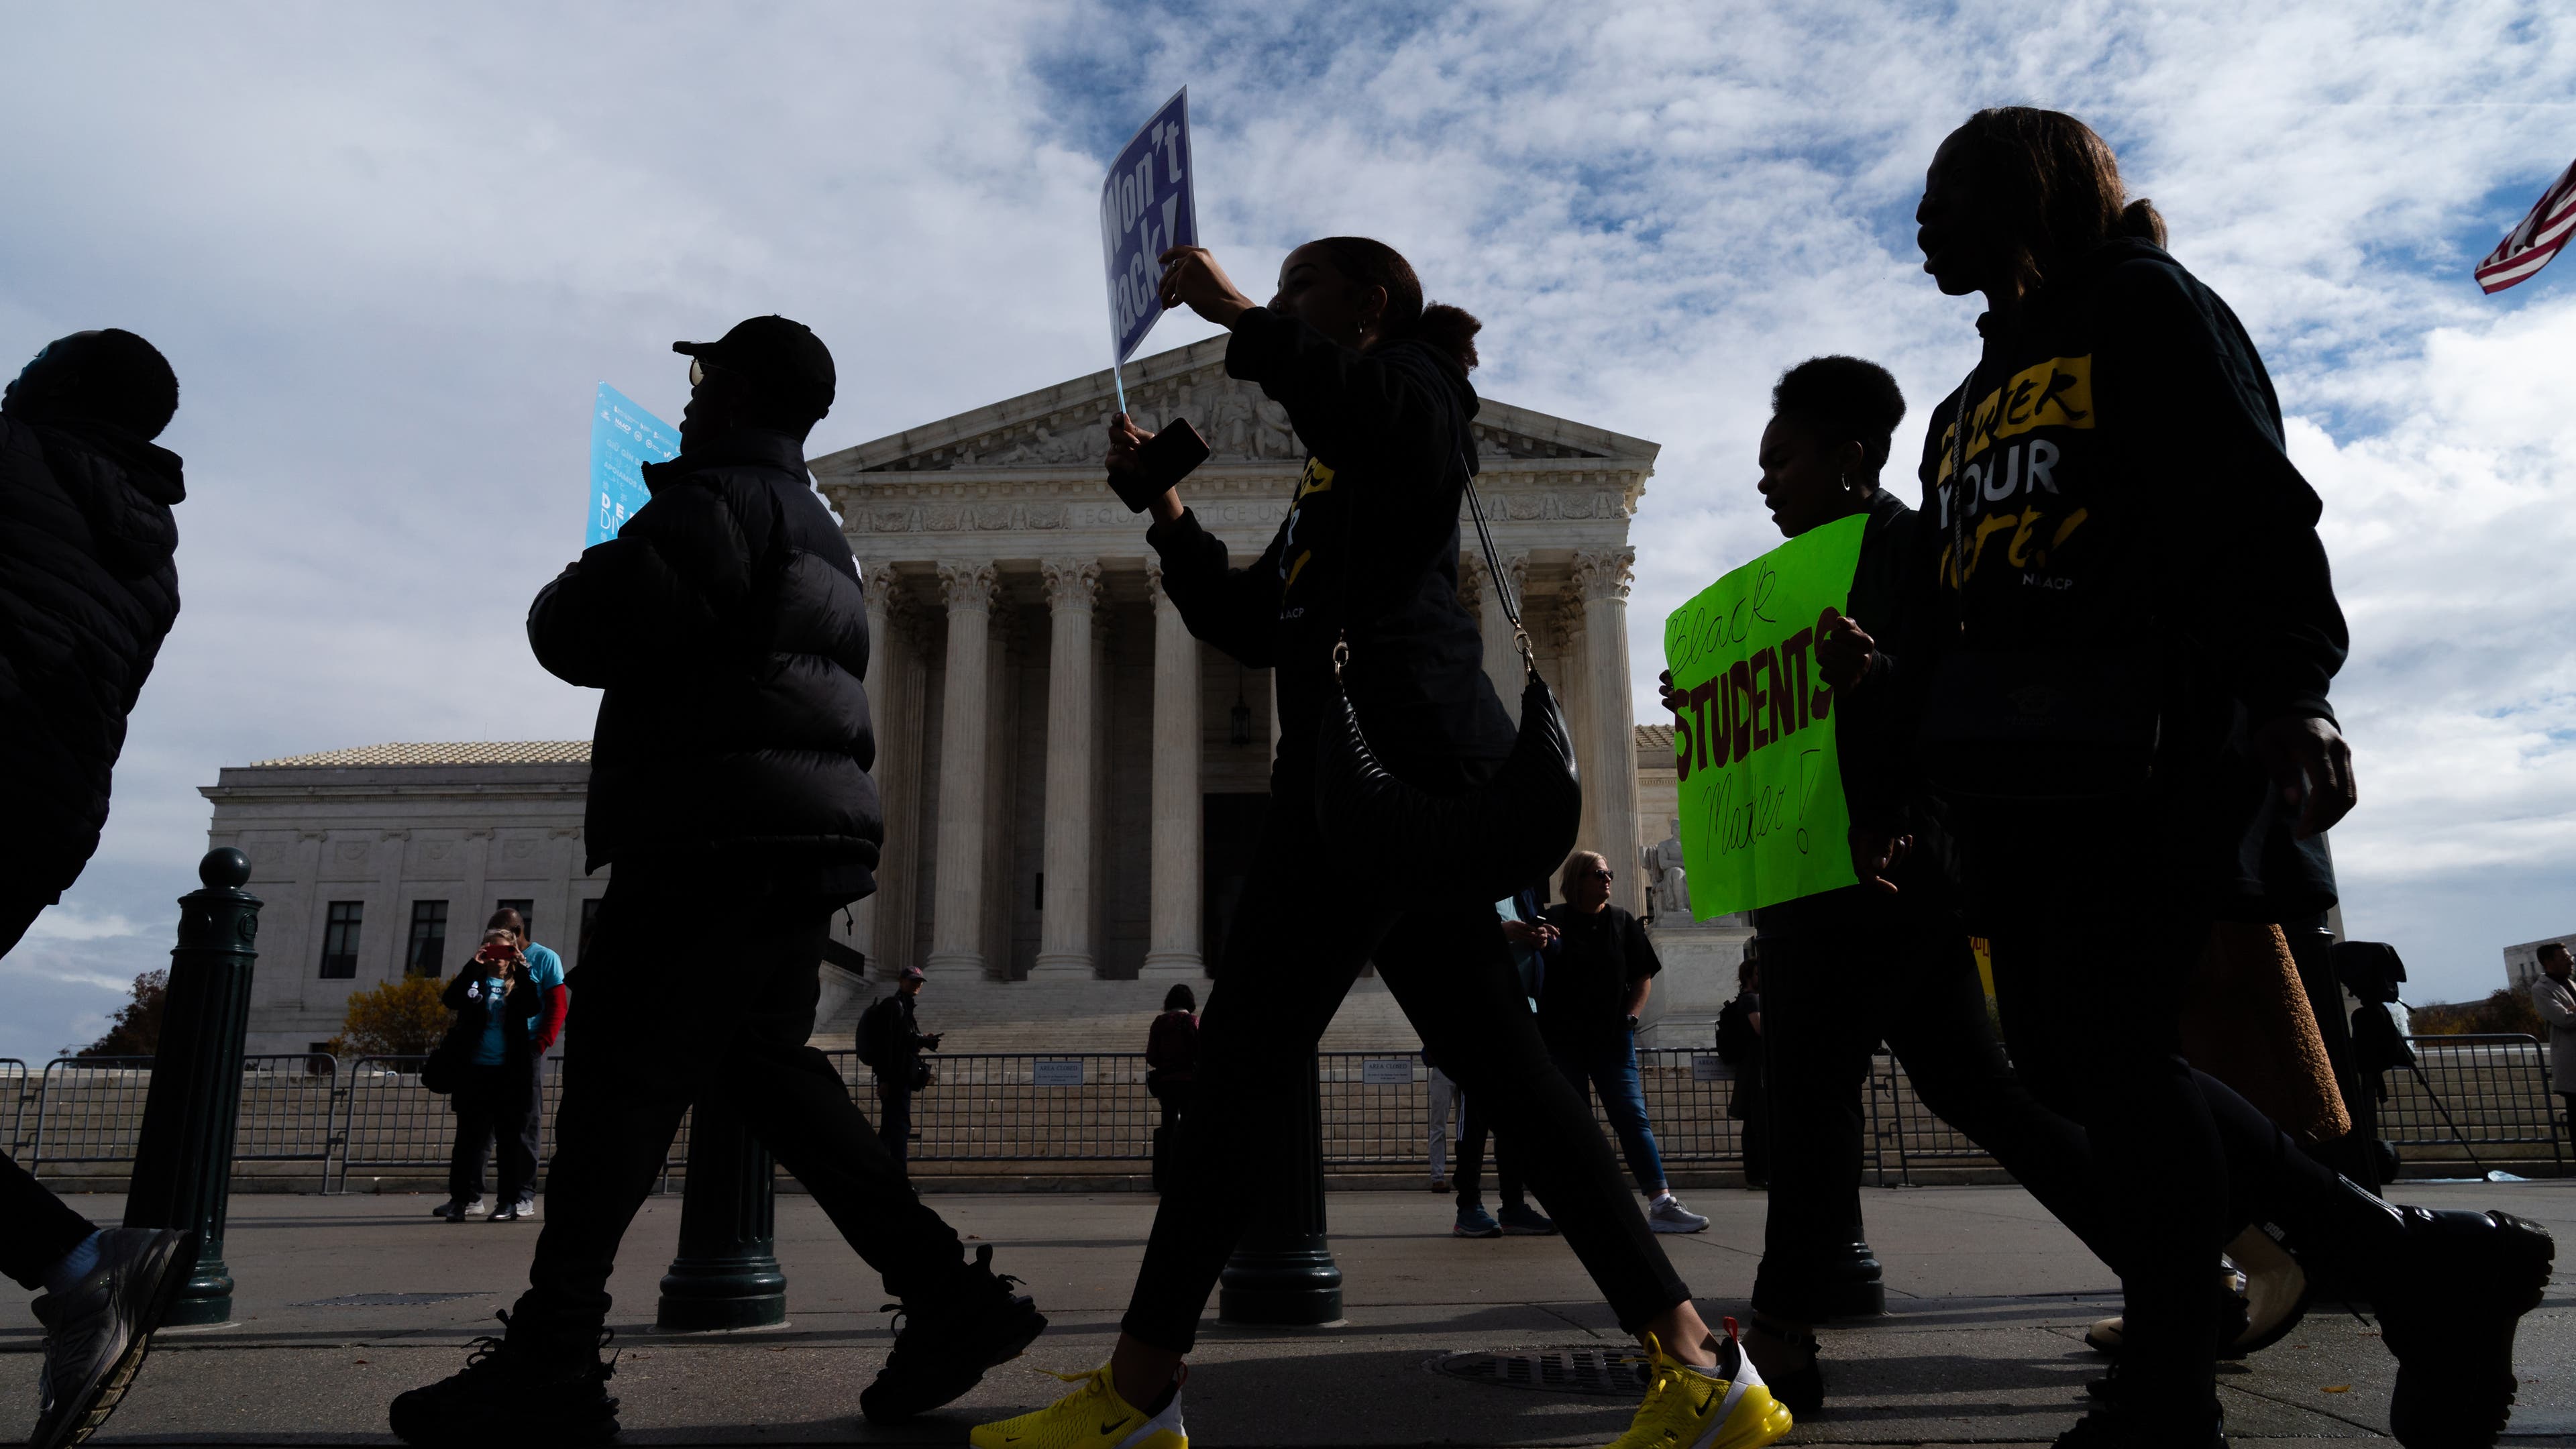 Supporters march during a rally in support affirmative action policies outside the Supreme Court in Washington, D.C. on October 31, 2022.